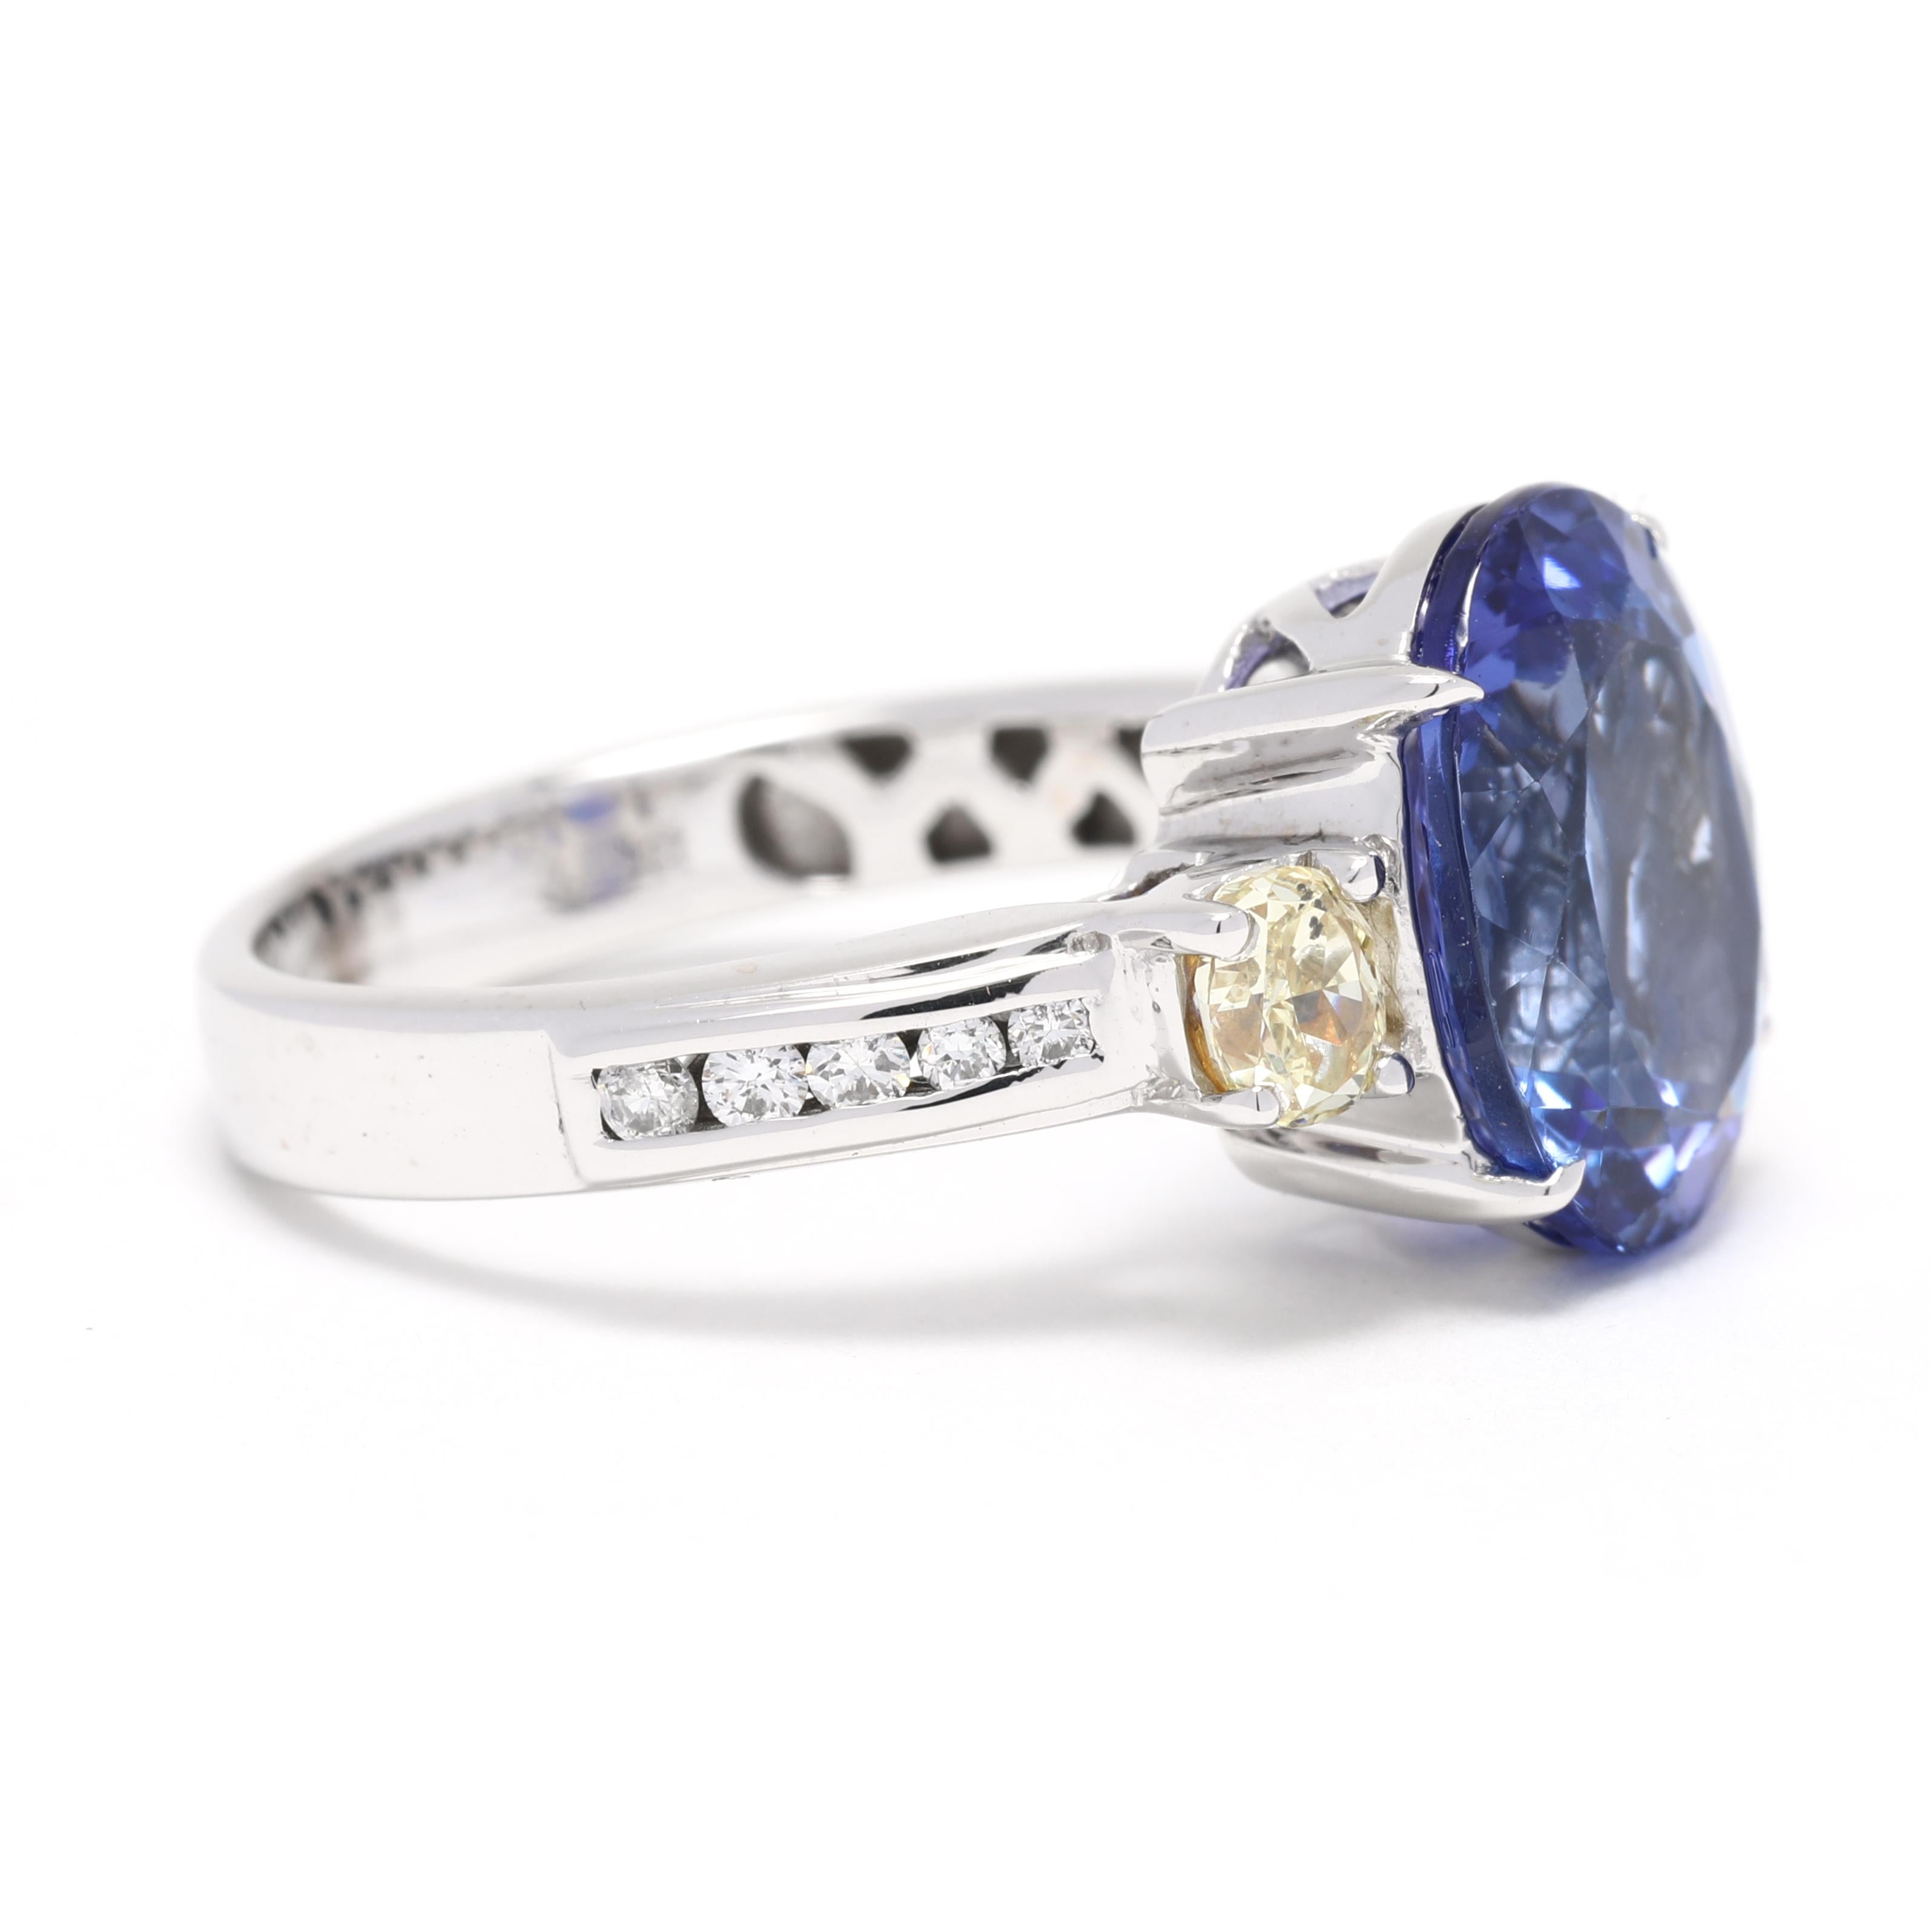 This gorgeous 5.38ctw Tanzanite Diamond Cocktail Ring is the perfect addition to your special day. Crafted with 18K White Gold, this ring features an exquisite 5.38 carat Tanzanite, surrounded by a halo of brilliant round diamonds. The perfect size